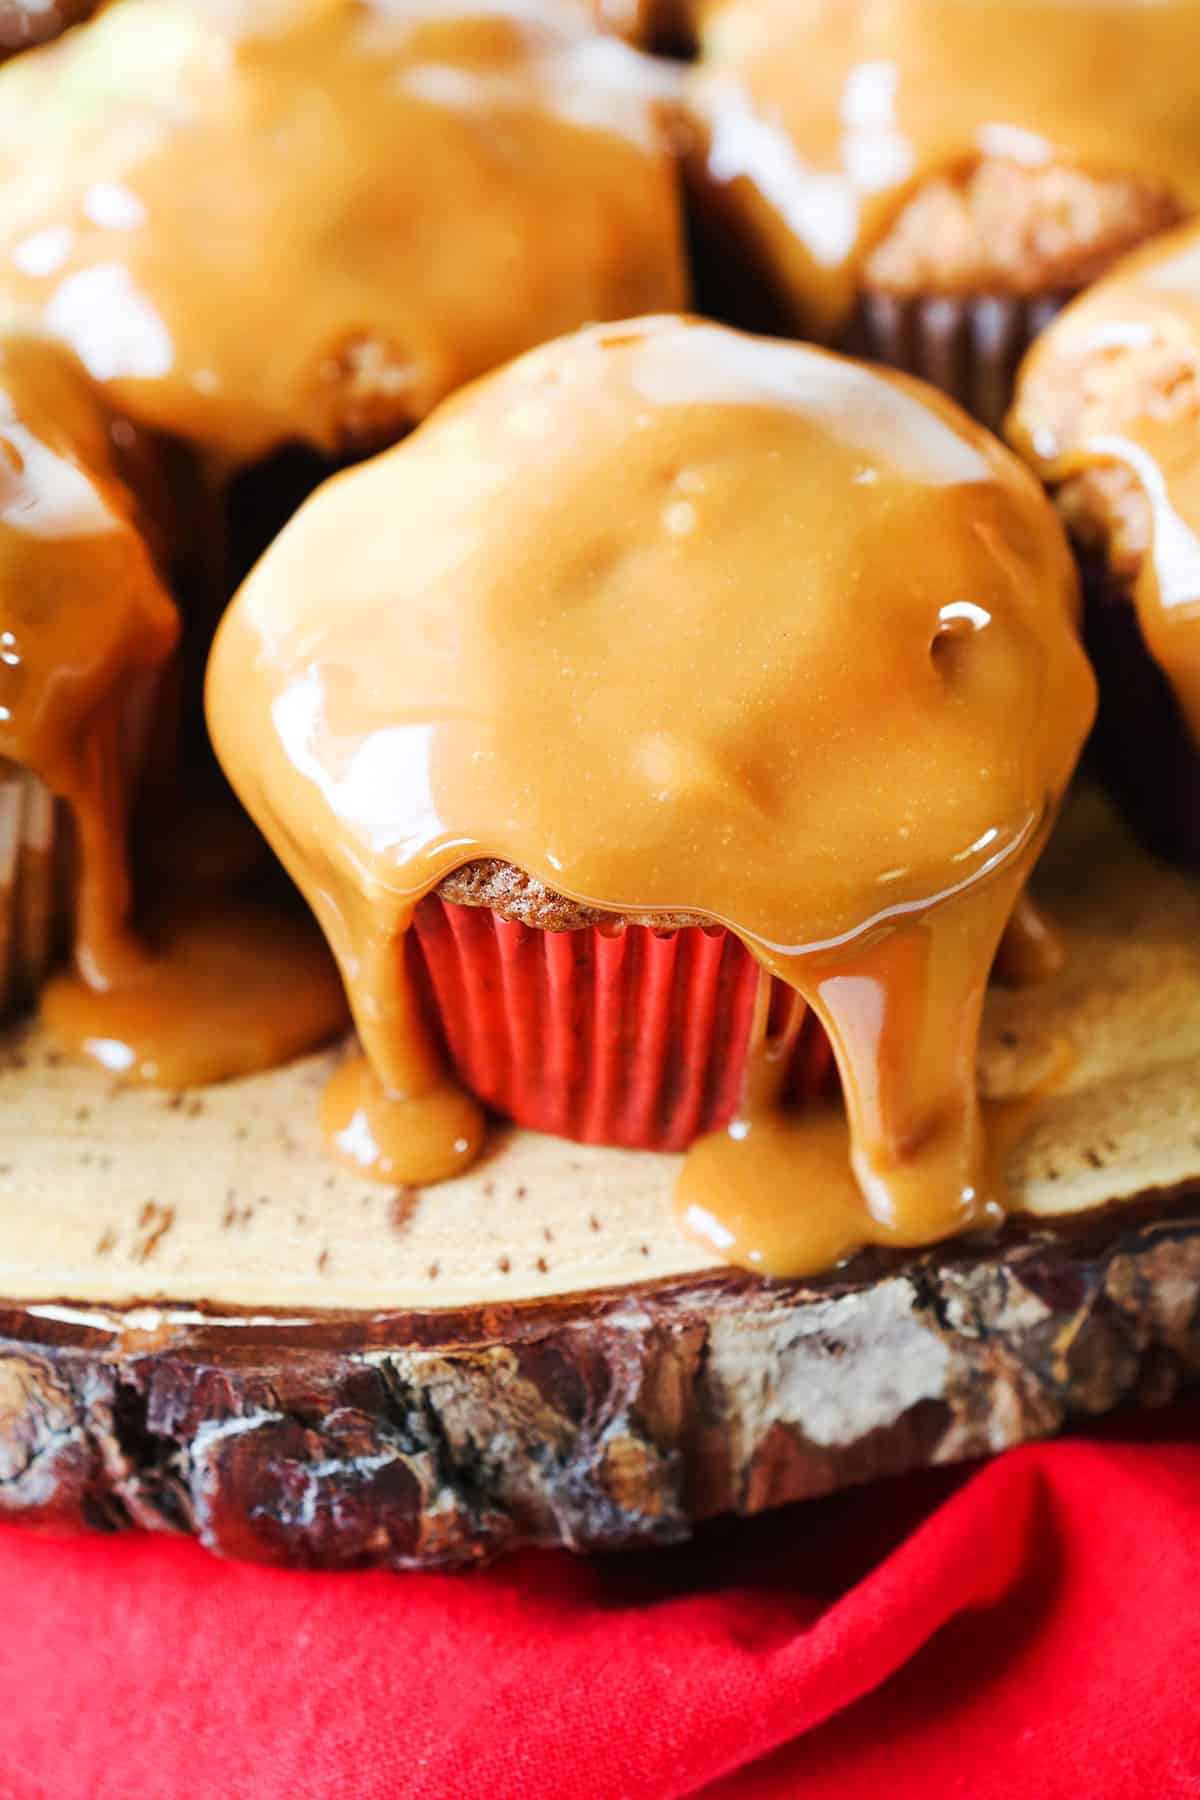 Caramel dripping down the sides of a batch of cupcakes.